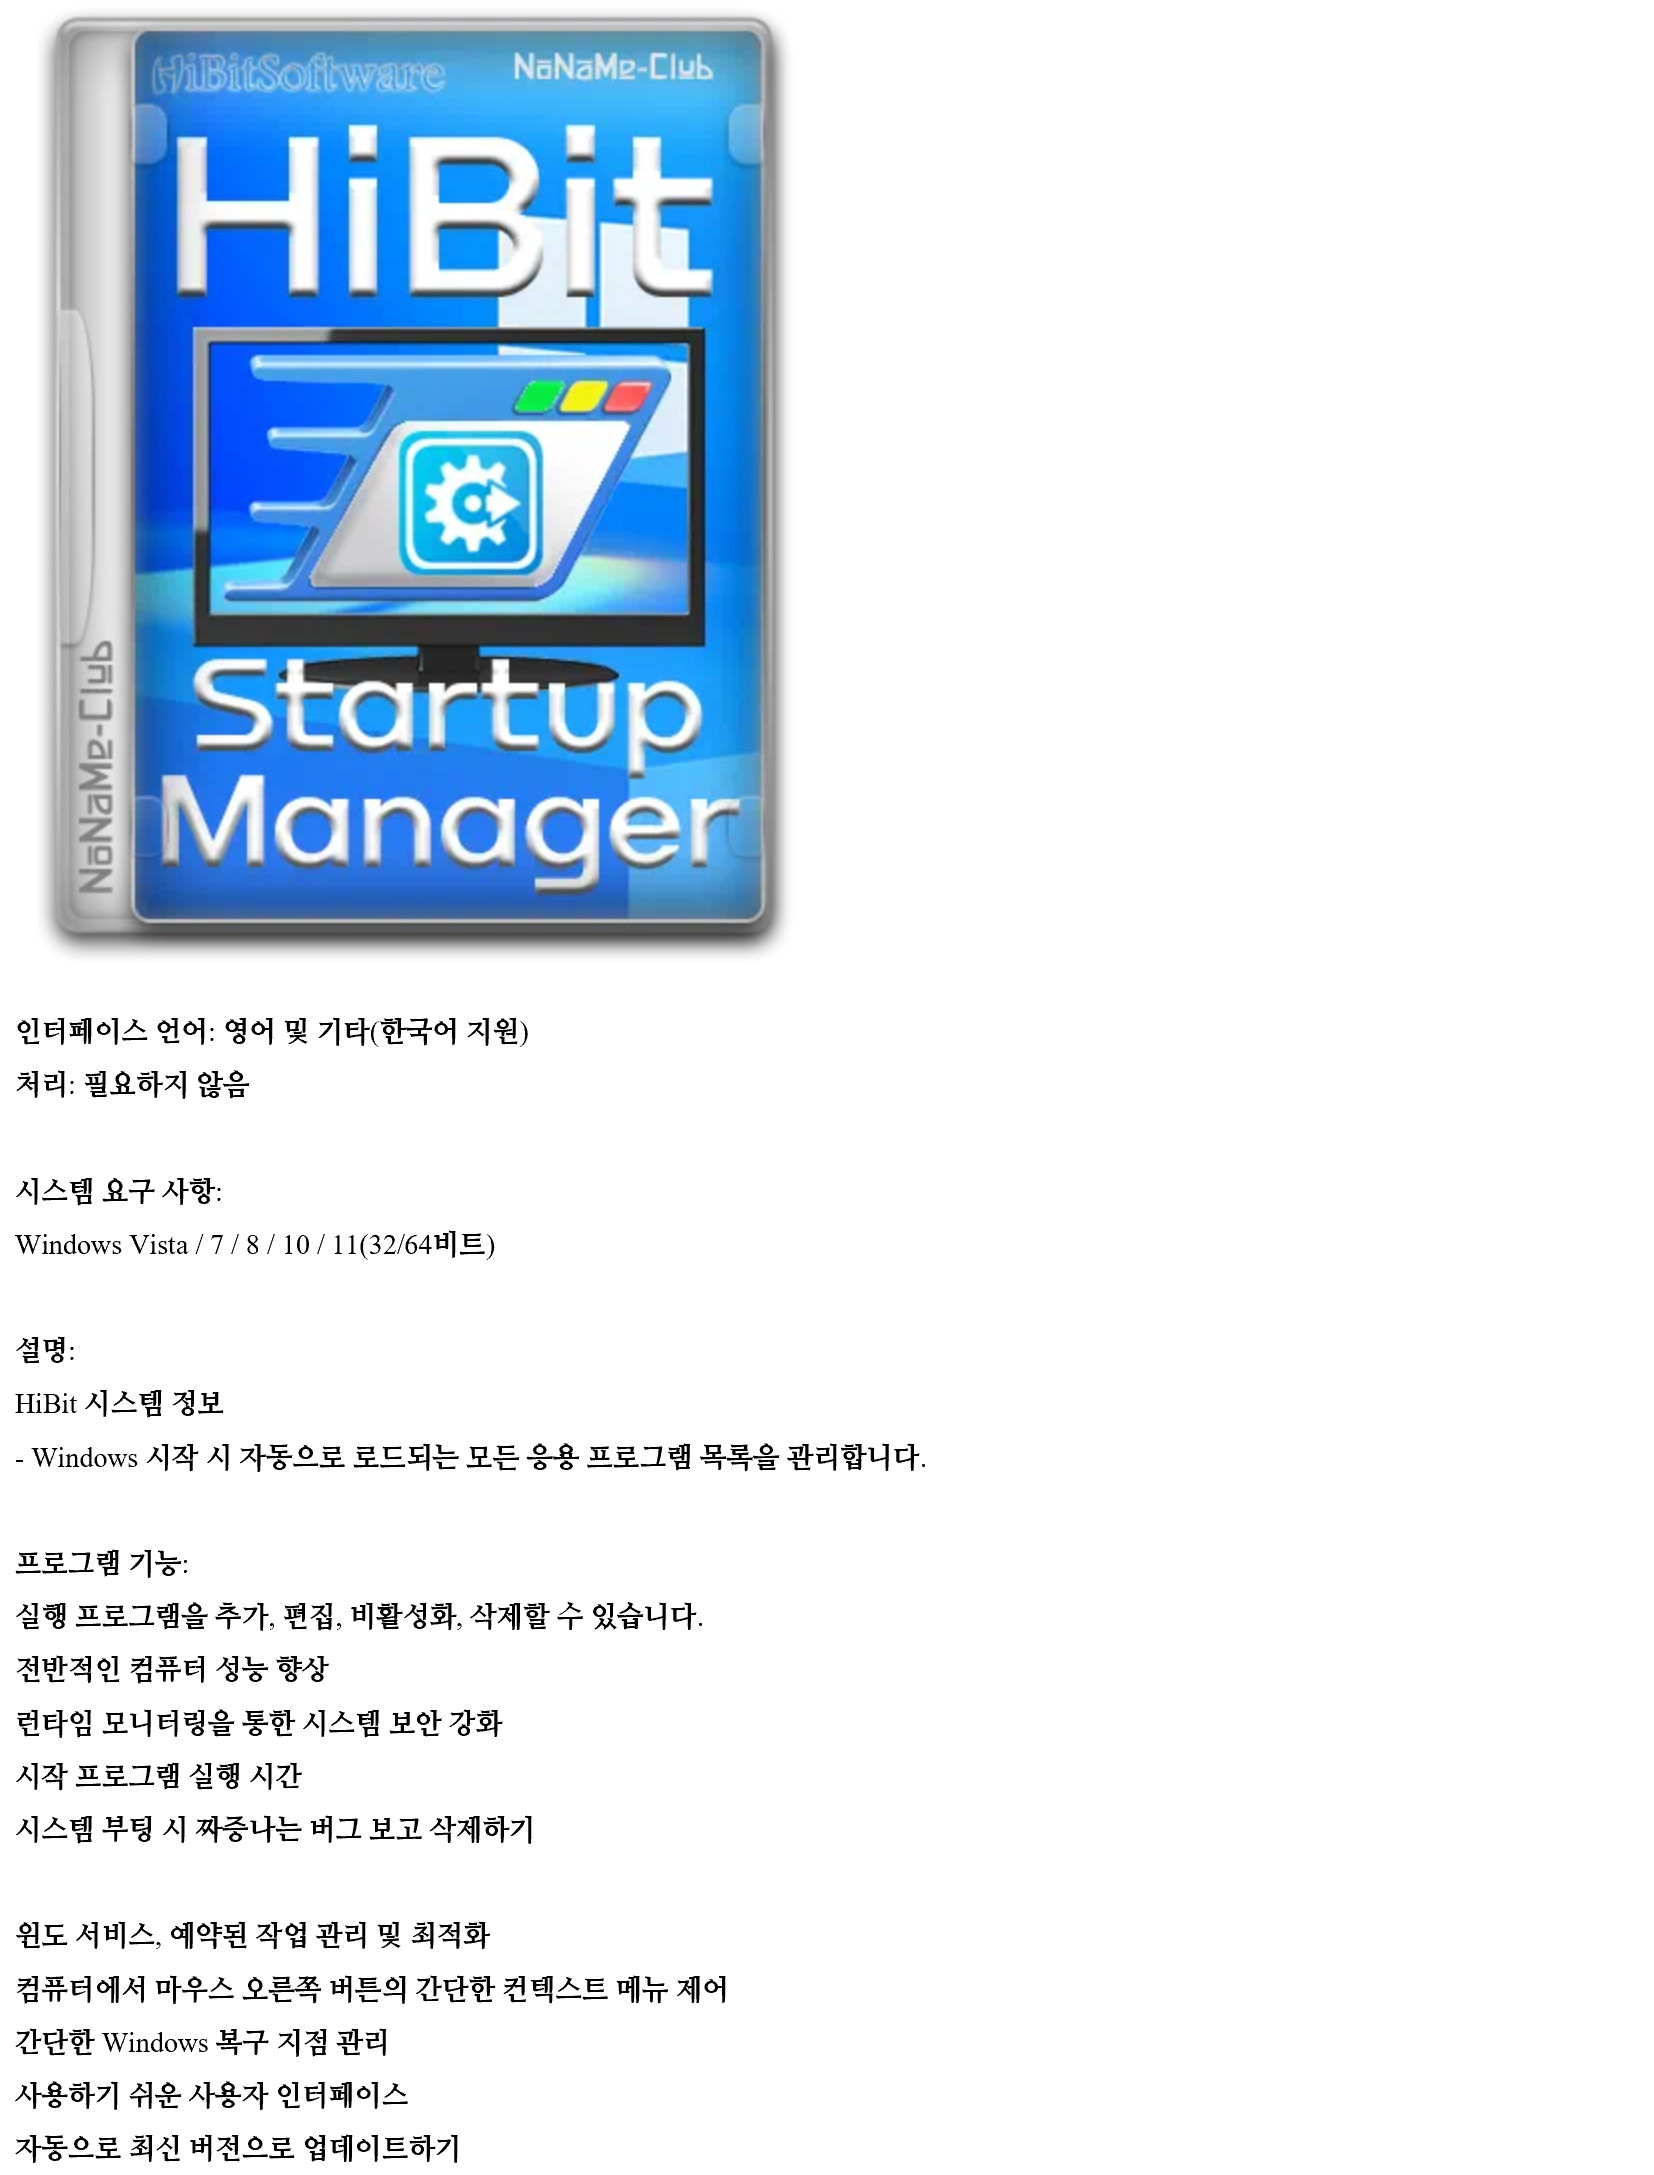 HiBit Startup Manager 2.6.20 for ipod download